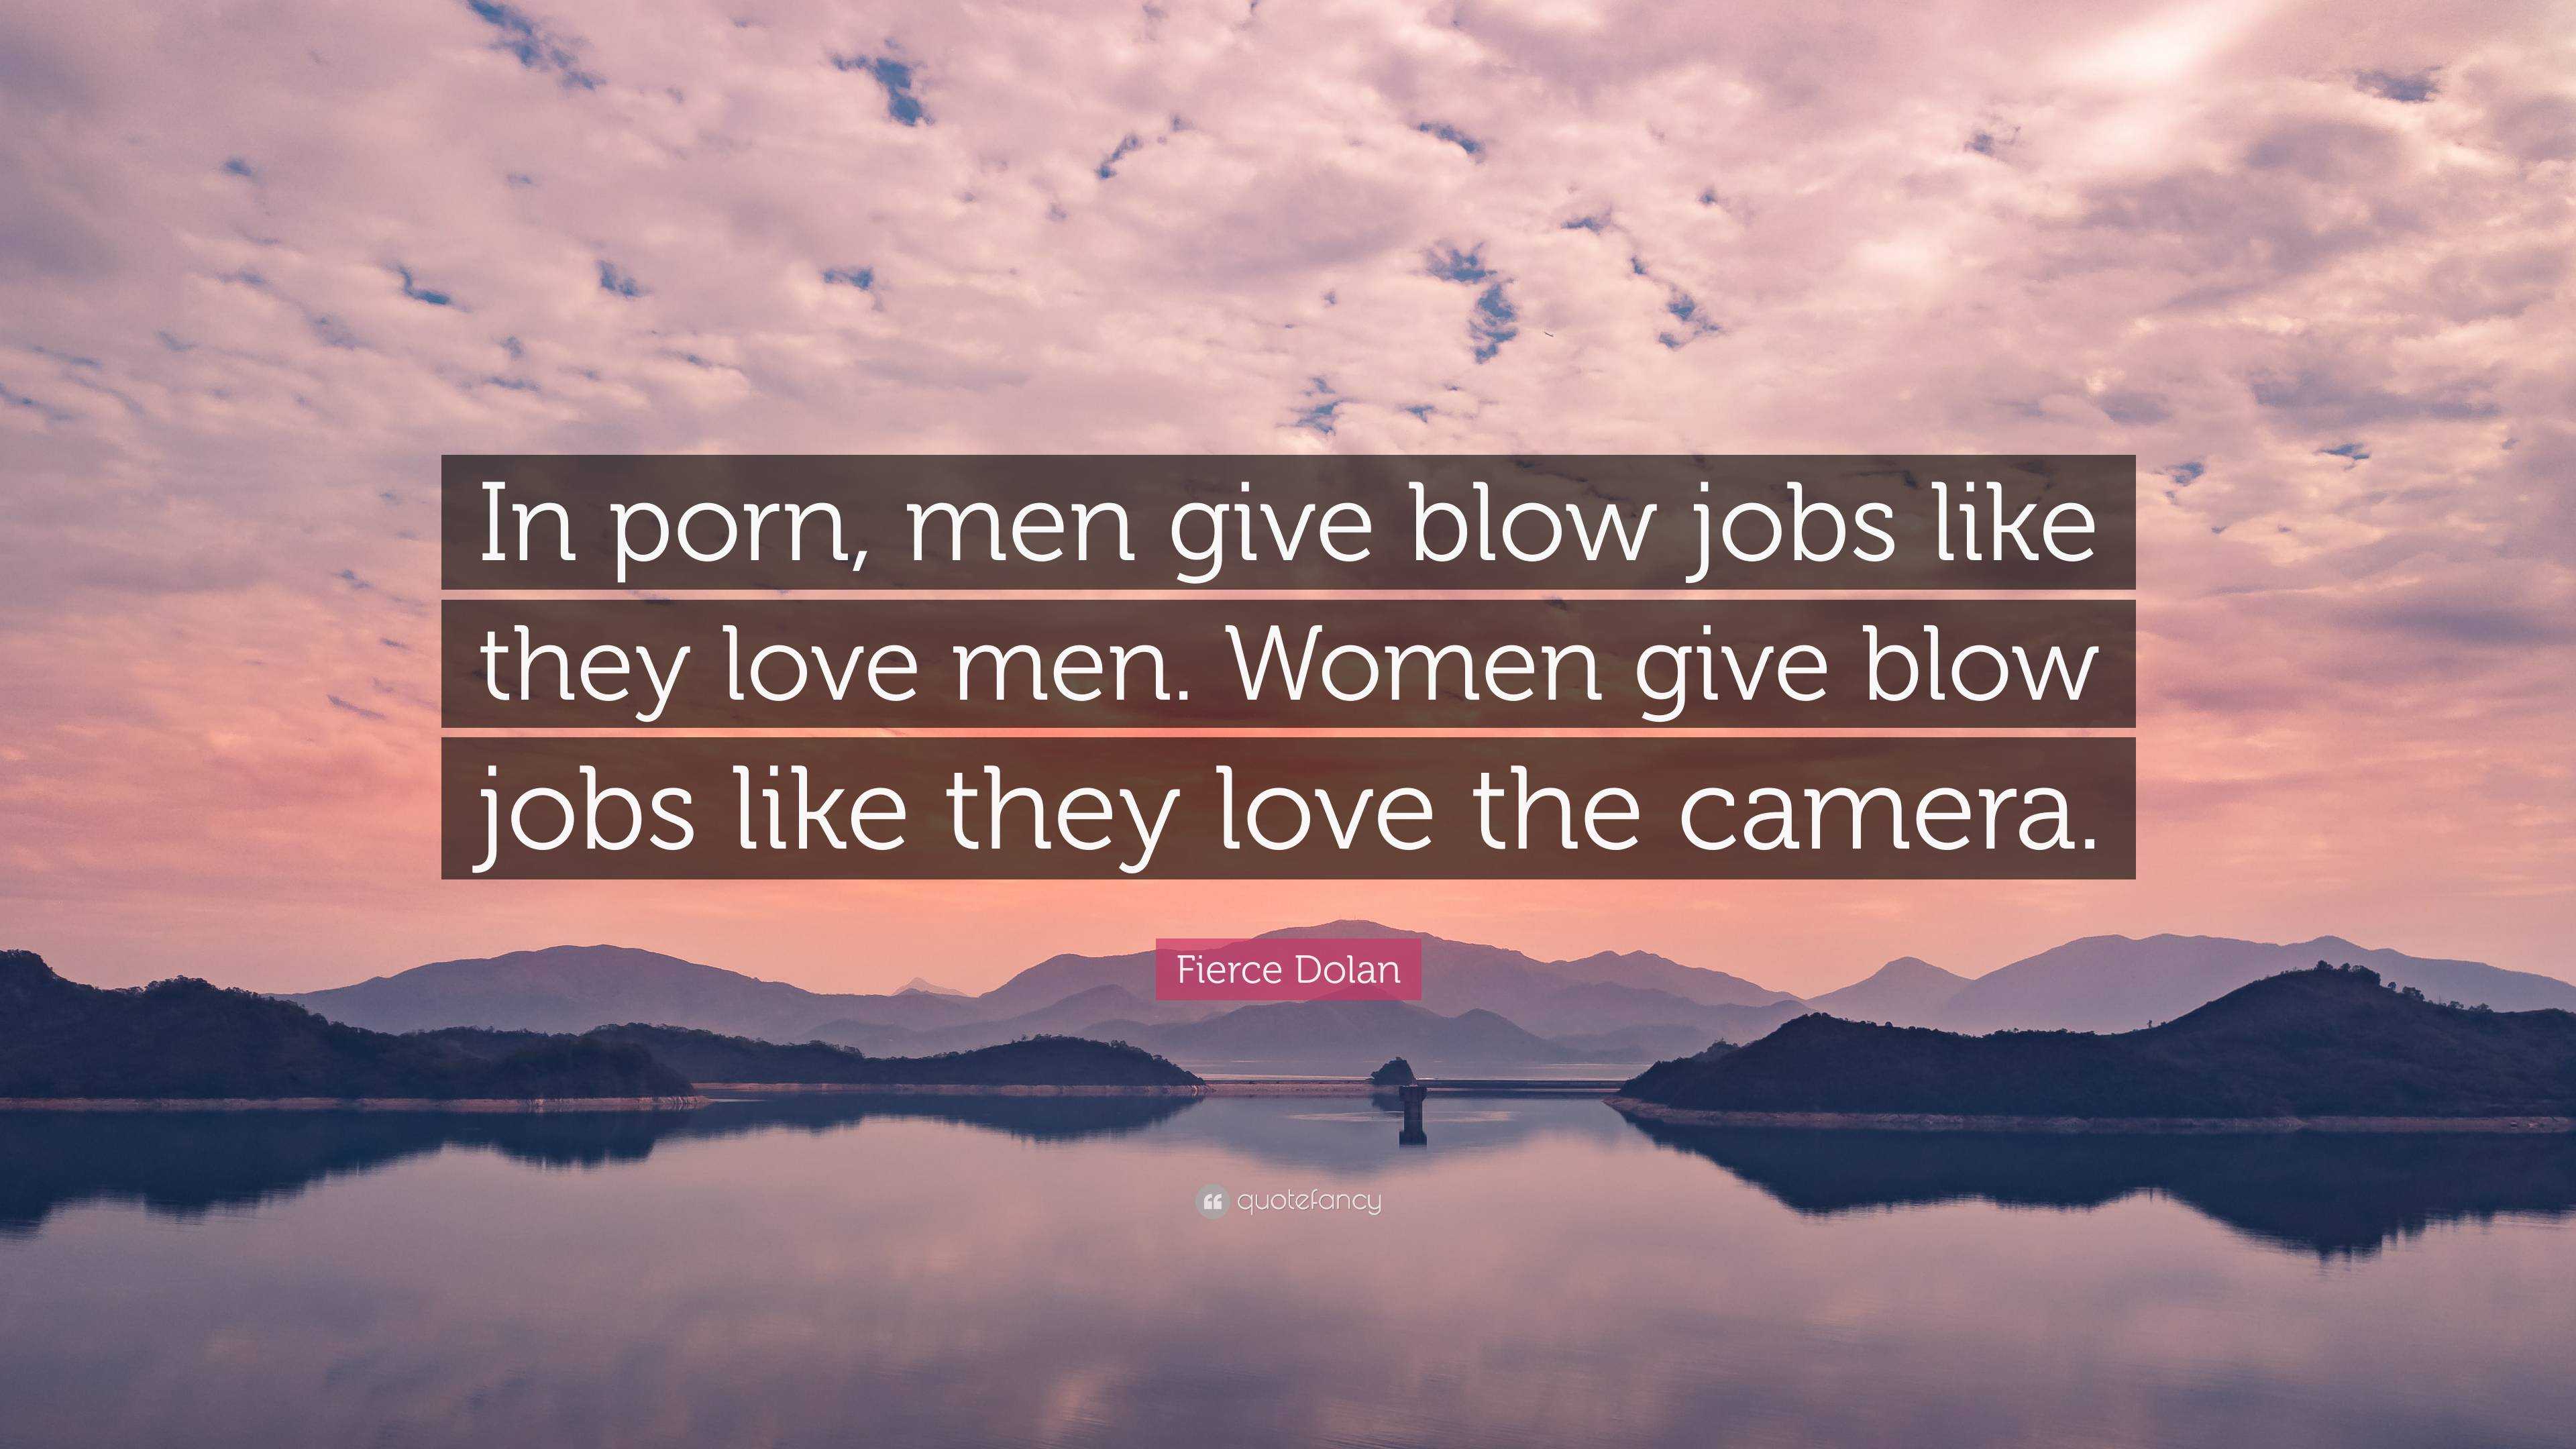 Fierce Dolan Quote “In porn, men give blow jobs like they love